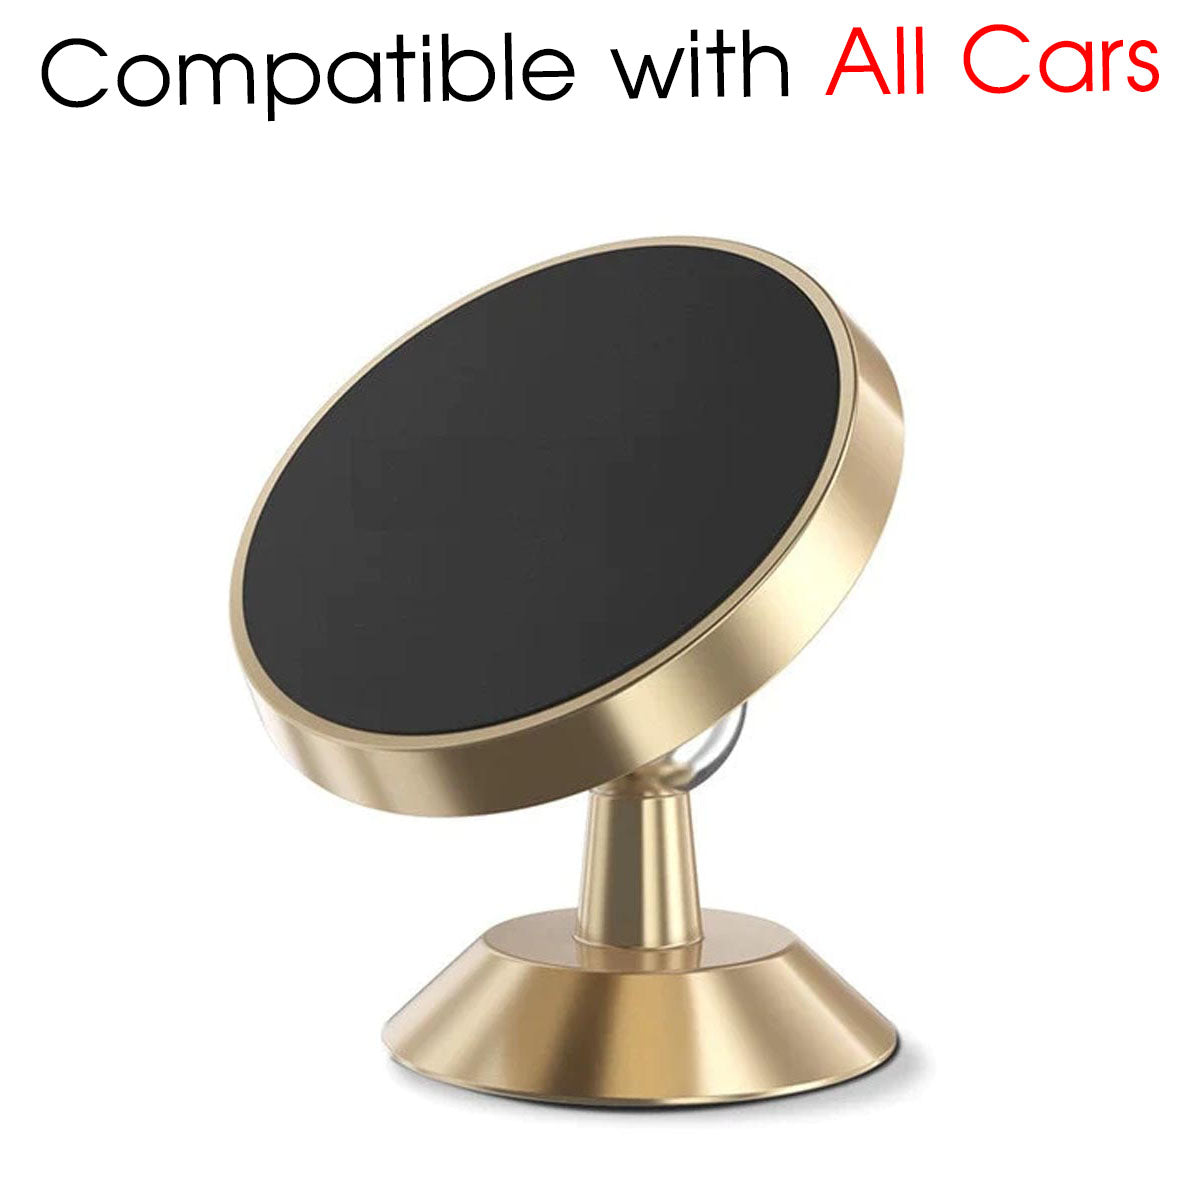 [2 Pack ] Magnetic Phone Mount, Custom For Your Cars, [ Super Strong Magnet ] [ with 4 Metal Plate ] car Magnetic Phone Holder, [ 360° Rotation ] Universal Dashboard car Mount Fits All Cell Phones, Car Accessories MA13982